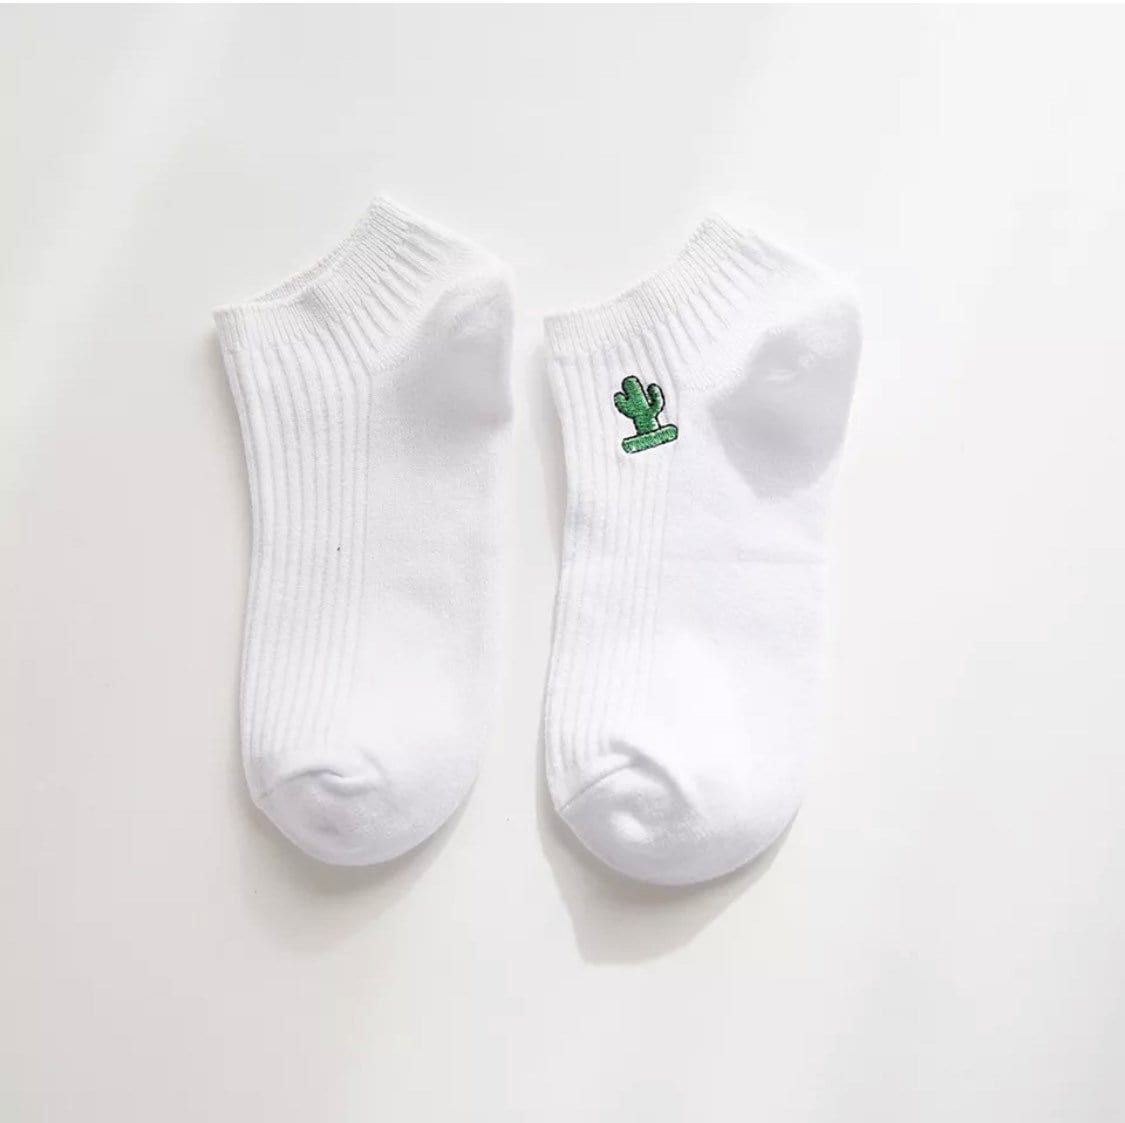 Miss June’s | 1 pair cotton socks｜Daily | Cotton | Cute | Ankle | Designed | Embroidered | Gift Idea | Casual | Comfortable | Women’s